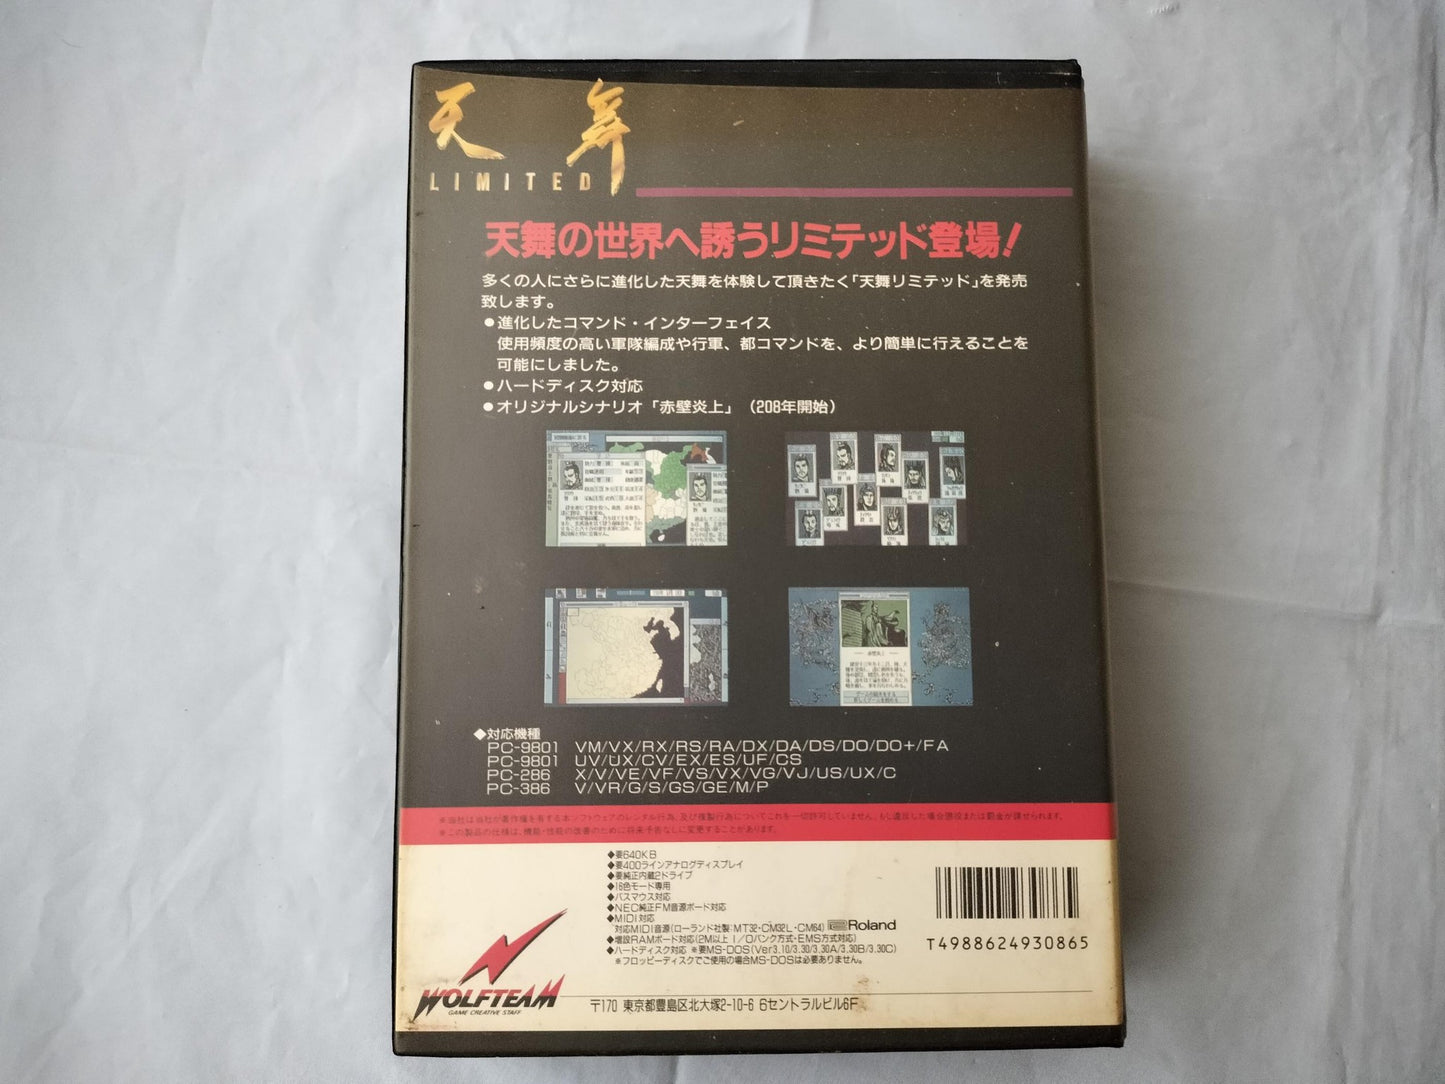 PC-9801 TENBU Limited Game Floppy disks, w/Manual, Box set, Not tested-f0608-